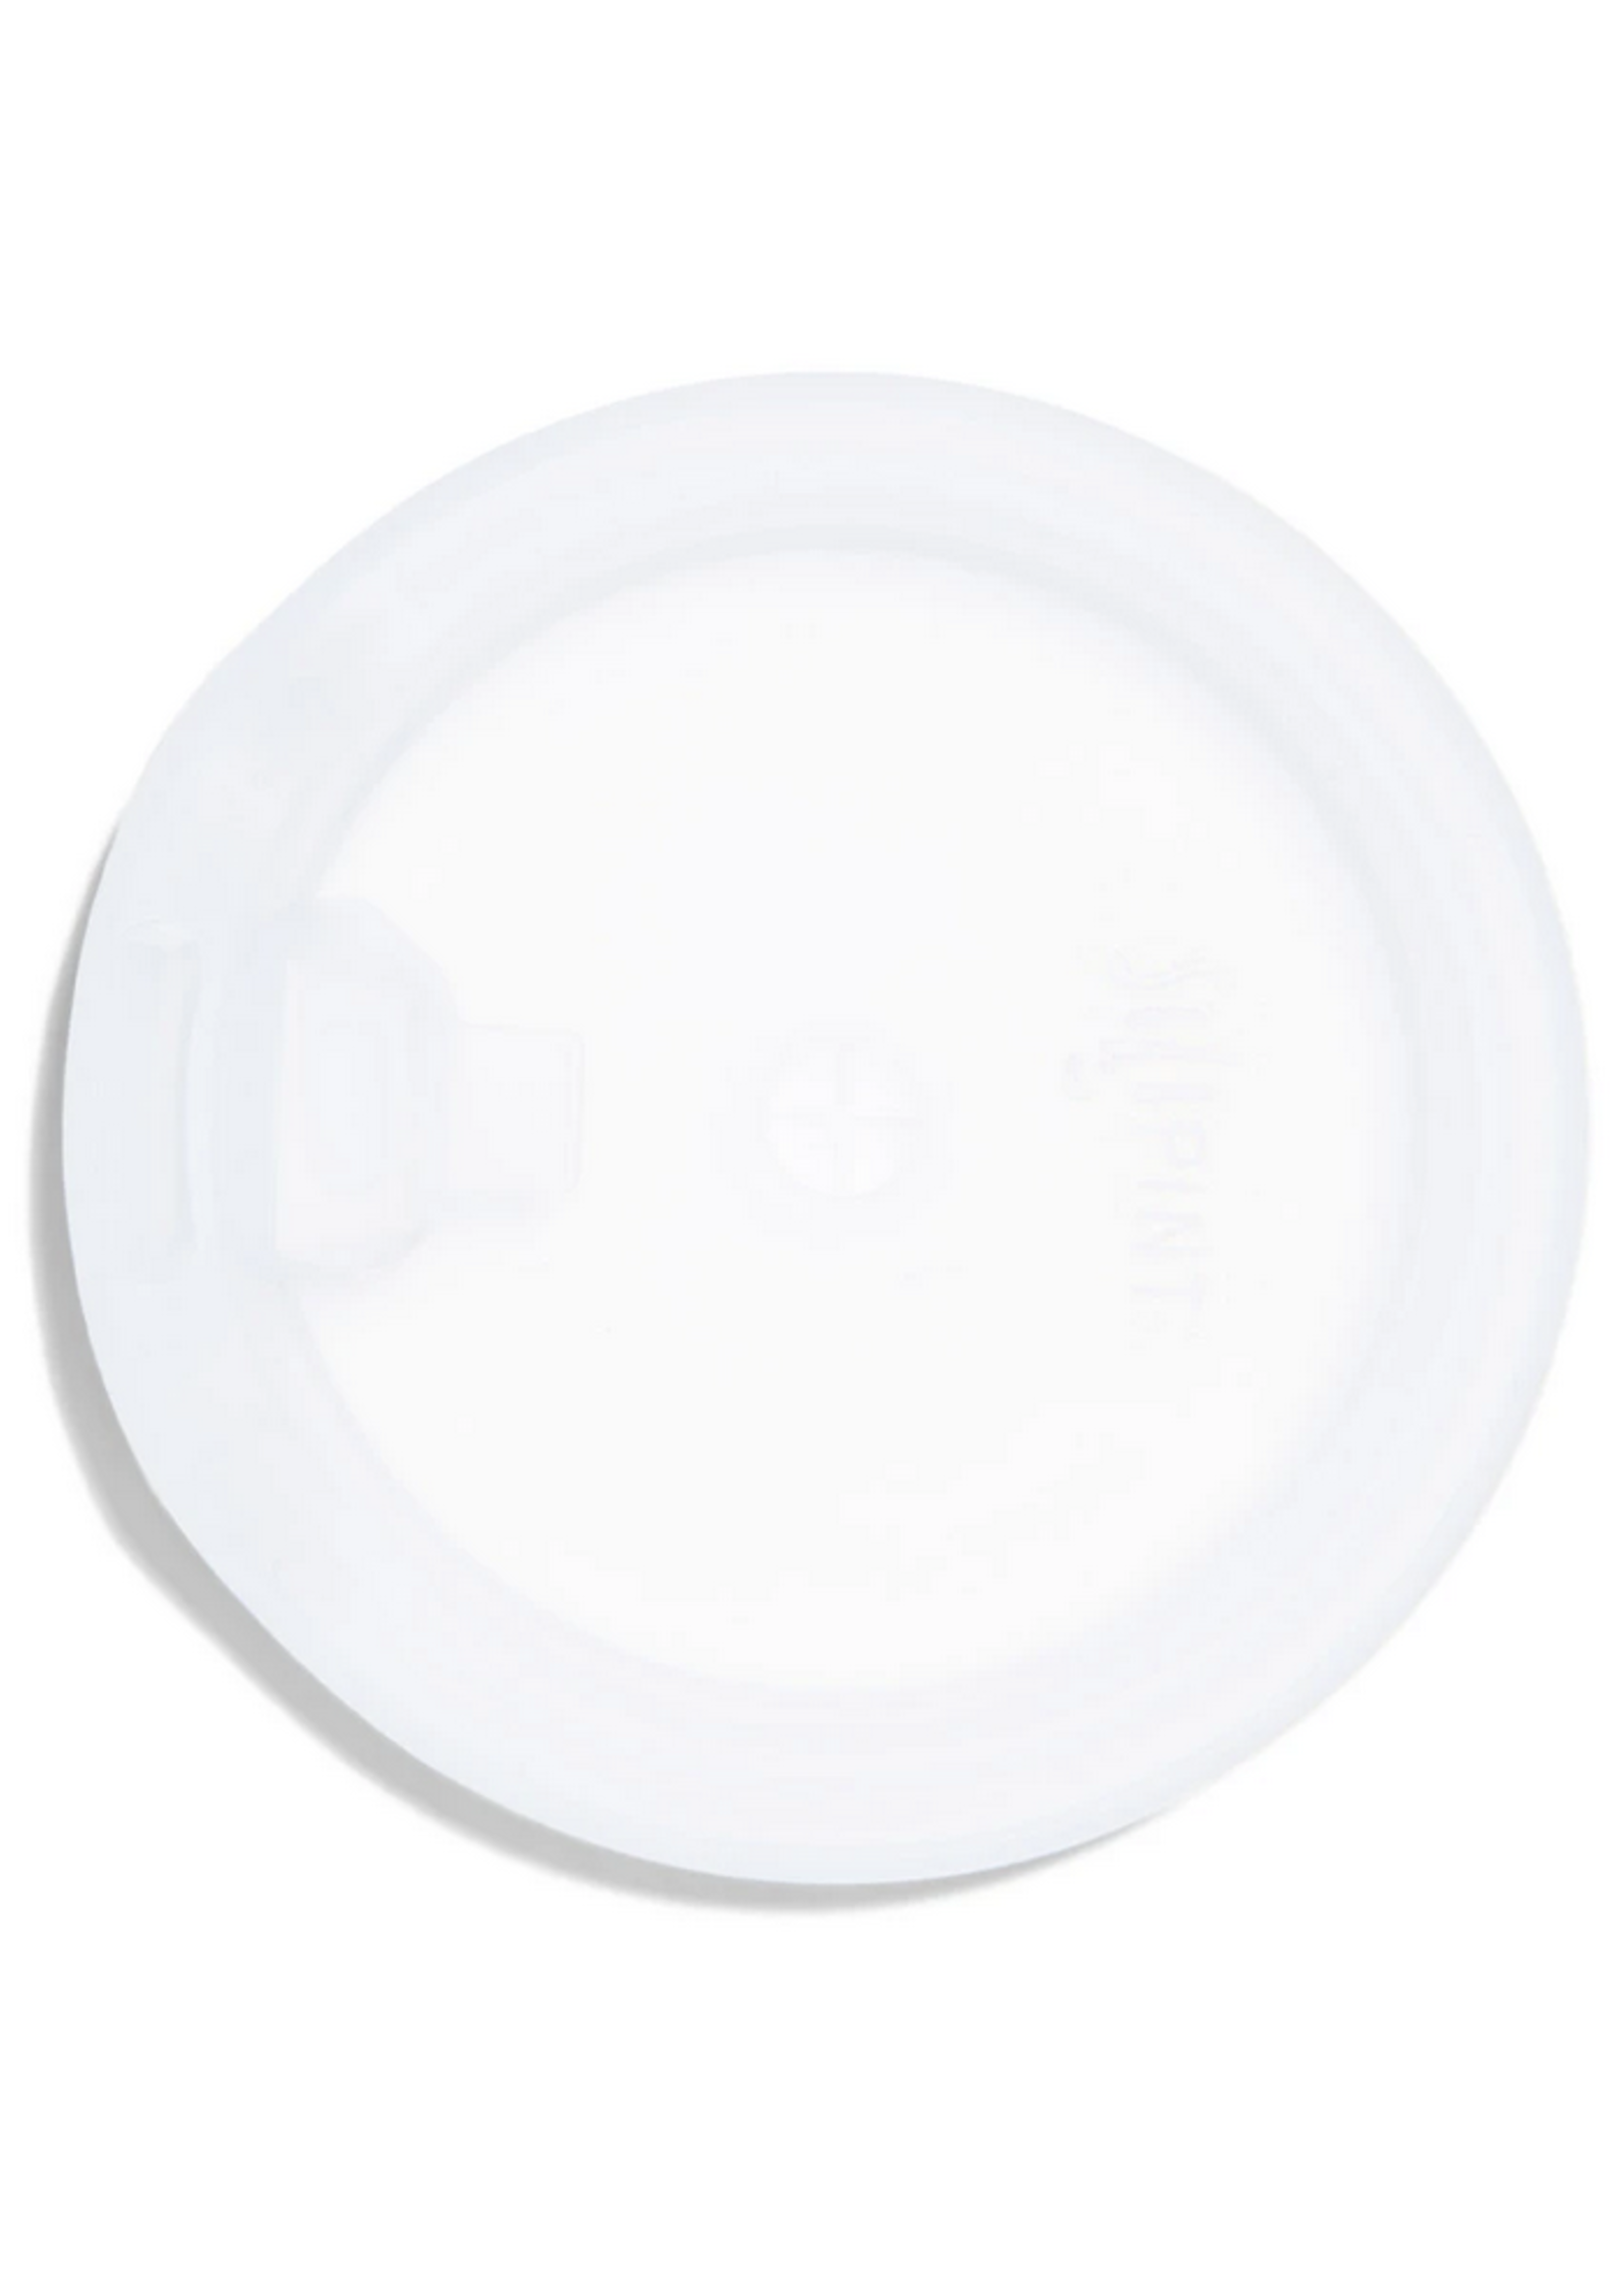 Silipint Silicone Travel Lid